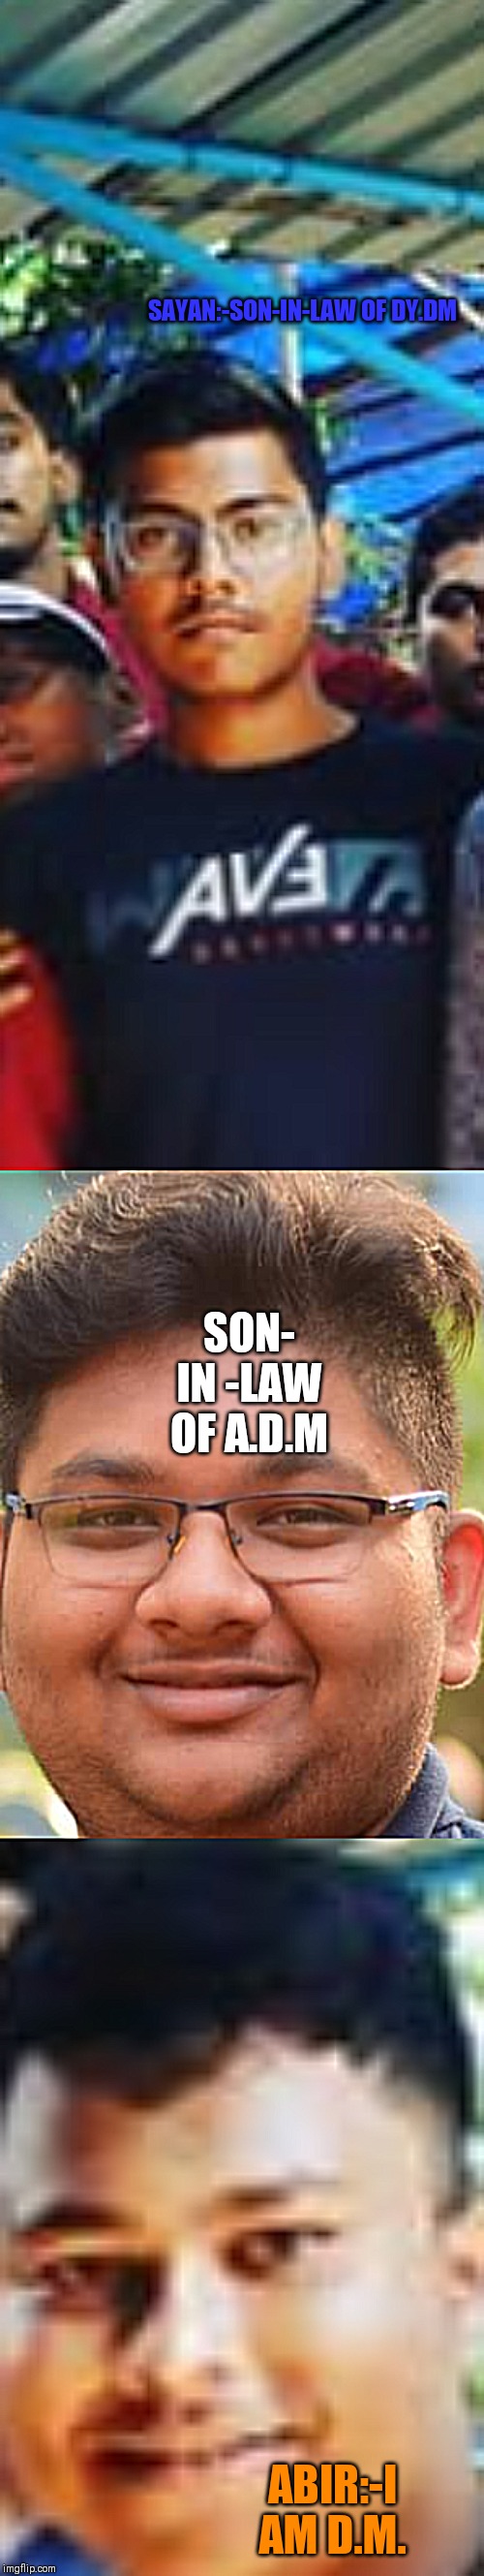 SAYAN:-SON-IN-LAW OF DY.DM; SON- IN -LAW OF A.D.M; ABIR:-I AM D.M. | image tagged in sayan | made w/ Imgflip meme maker